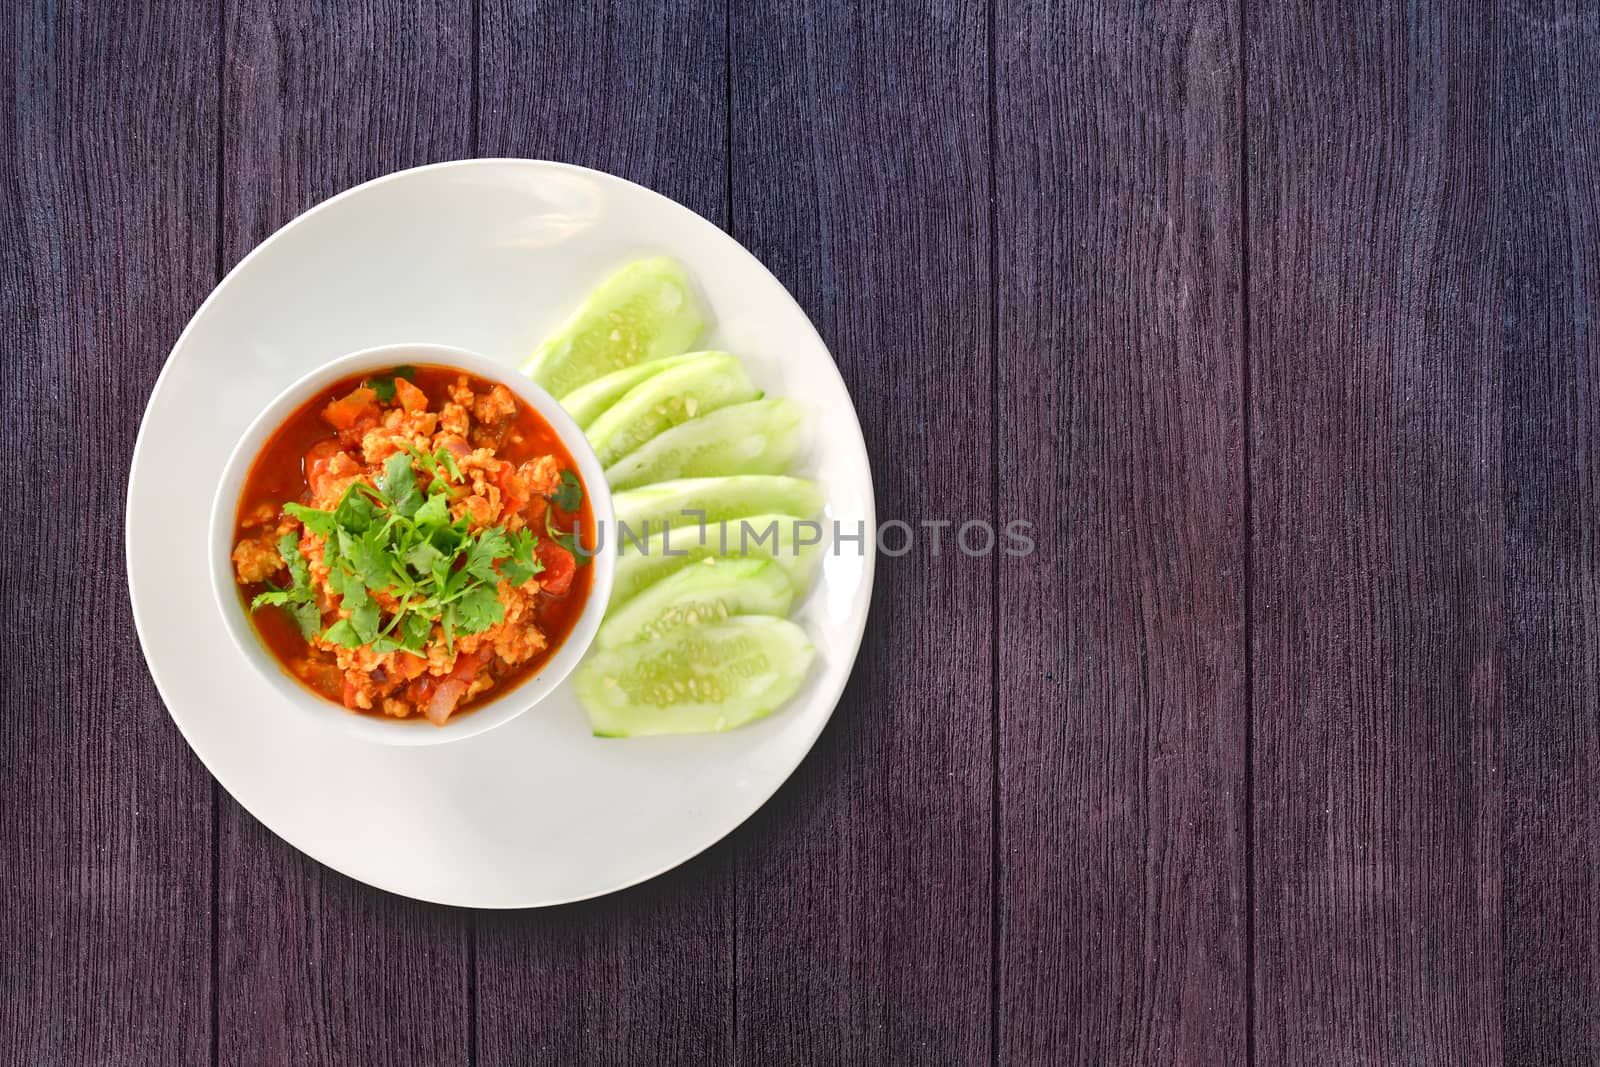 Thai Northern Style Pork and Tomato Relish in white bowl served with cucumber sliced on dark wooden background. Hot and spicy dipping. Top view.